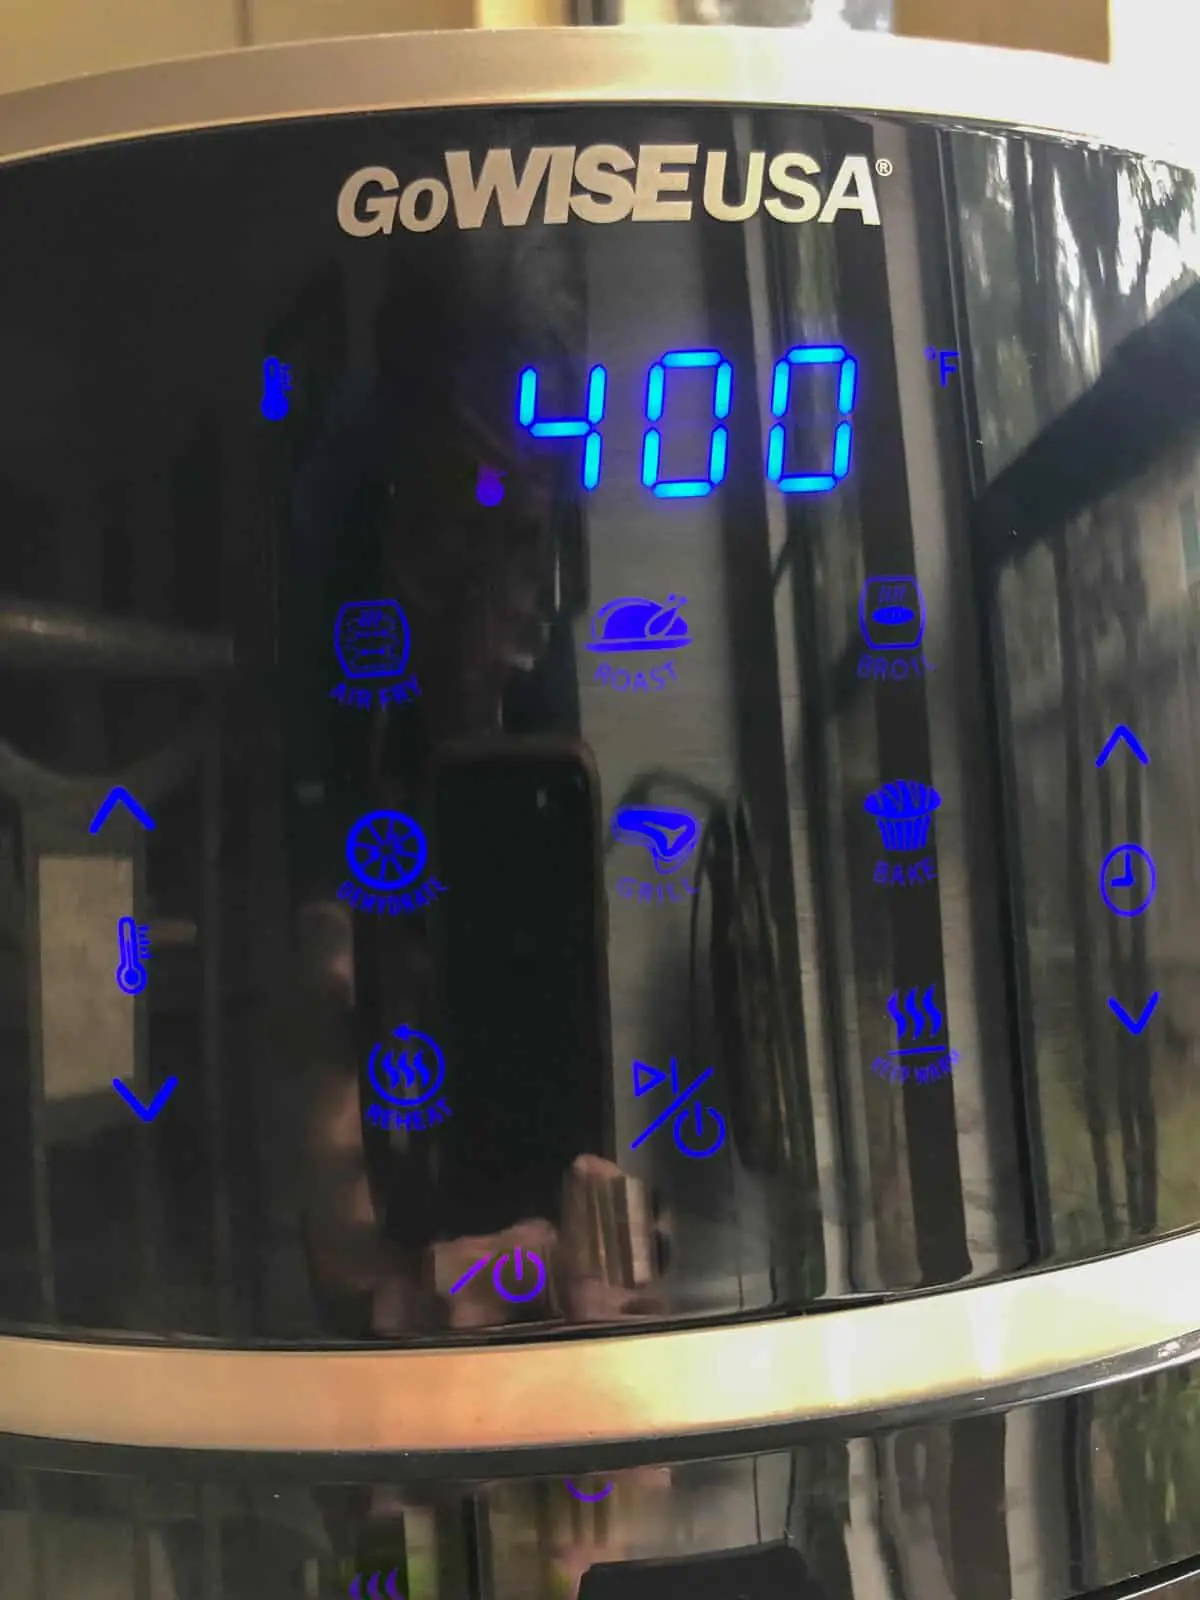 Black GoWise Air Fryer with 400F set as the temperature and various presets lit up in blue.